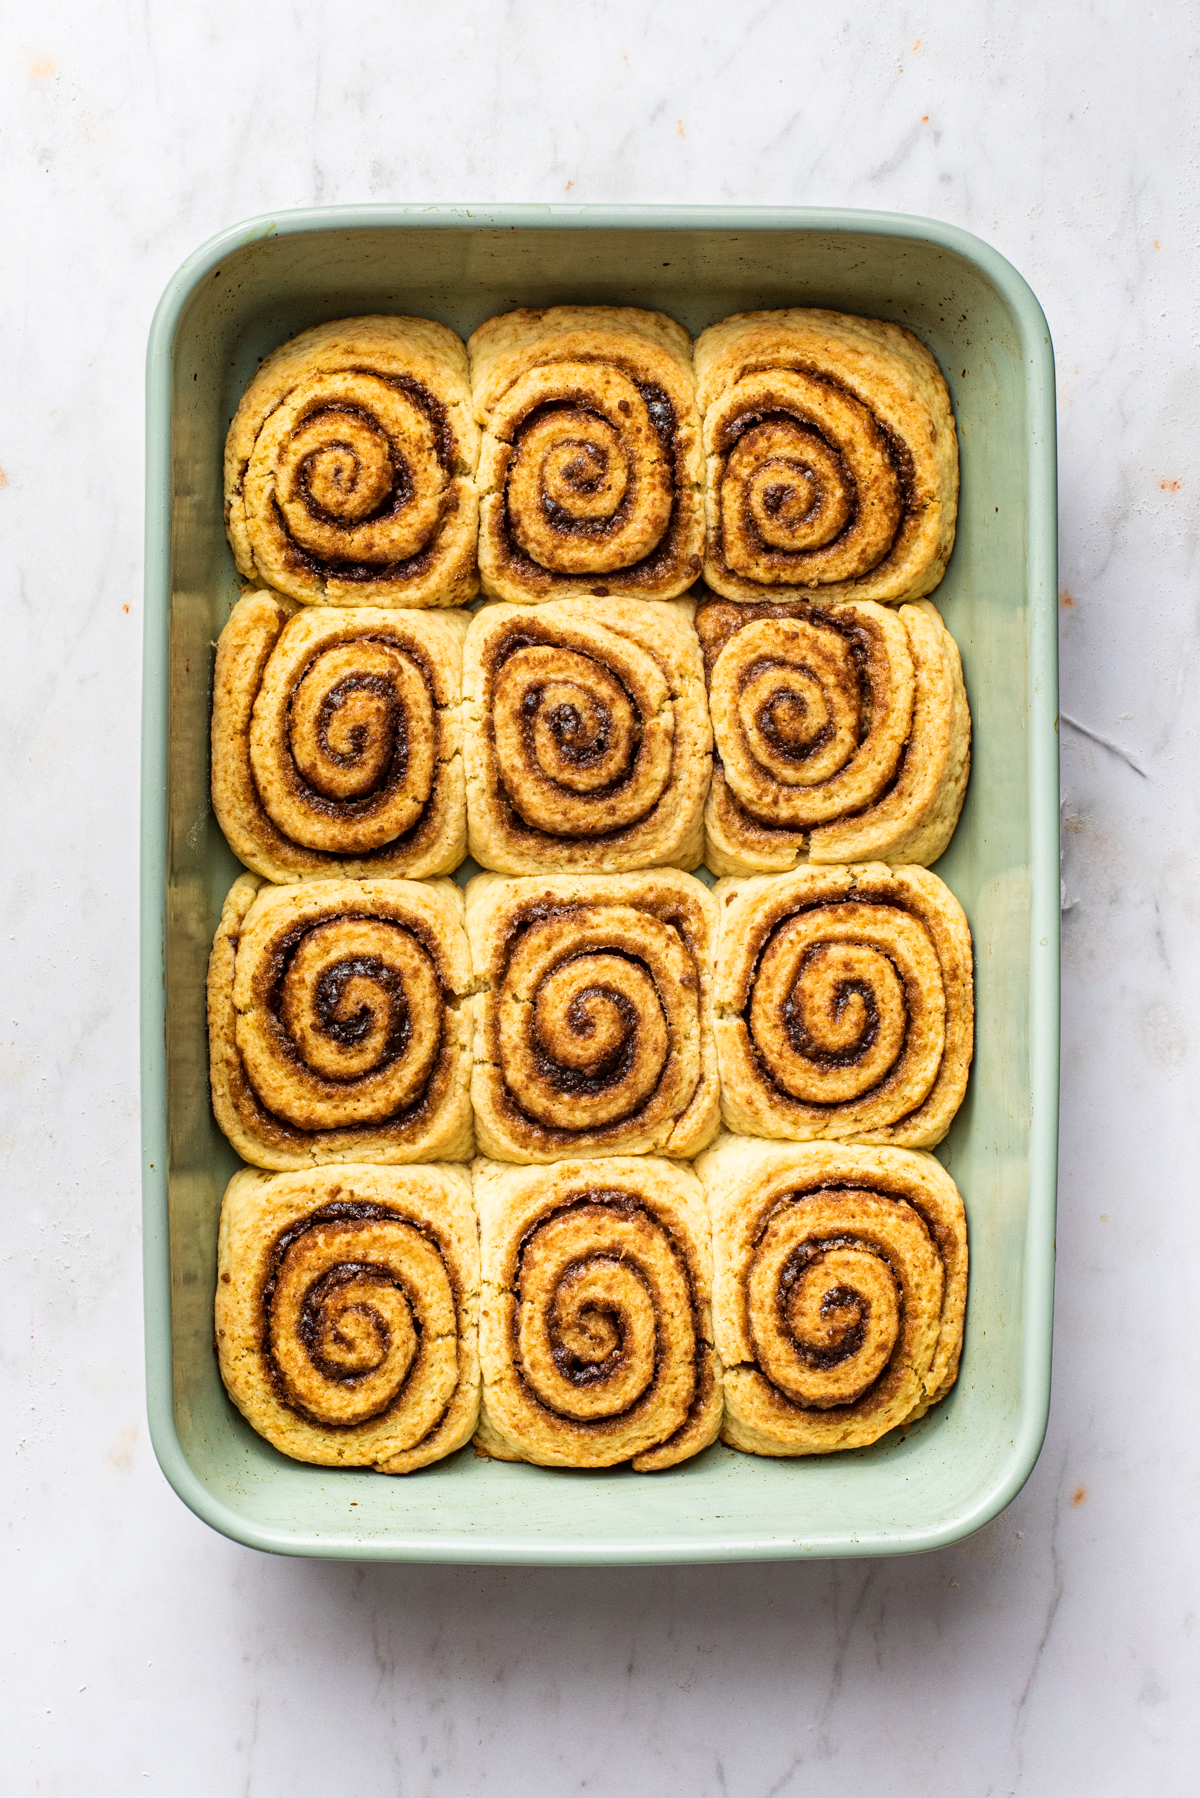 Baked rolls, now touching each other in the dish.